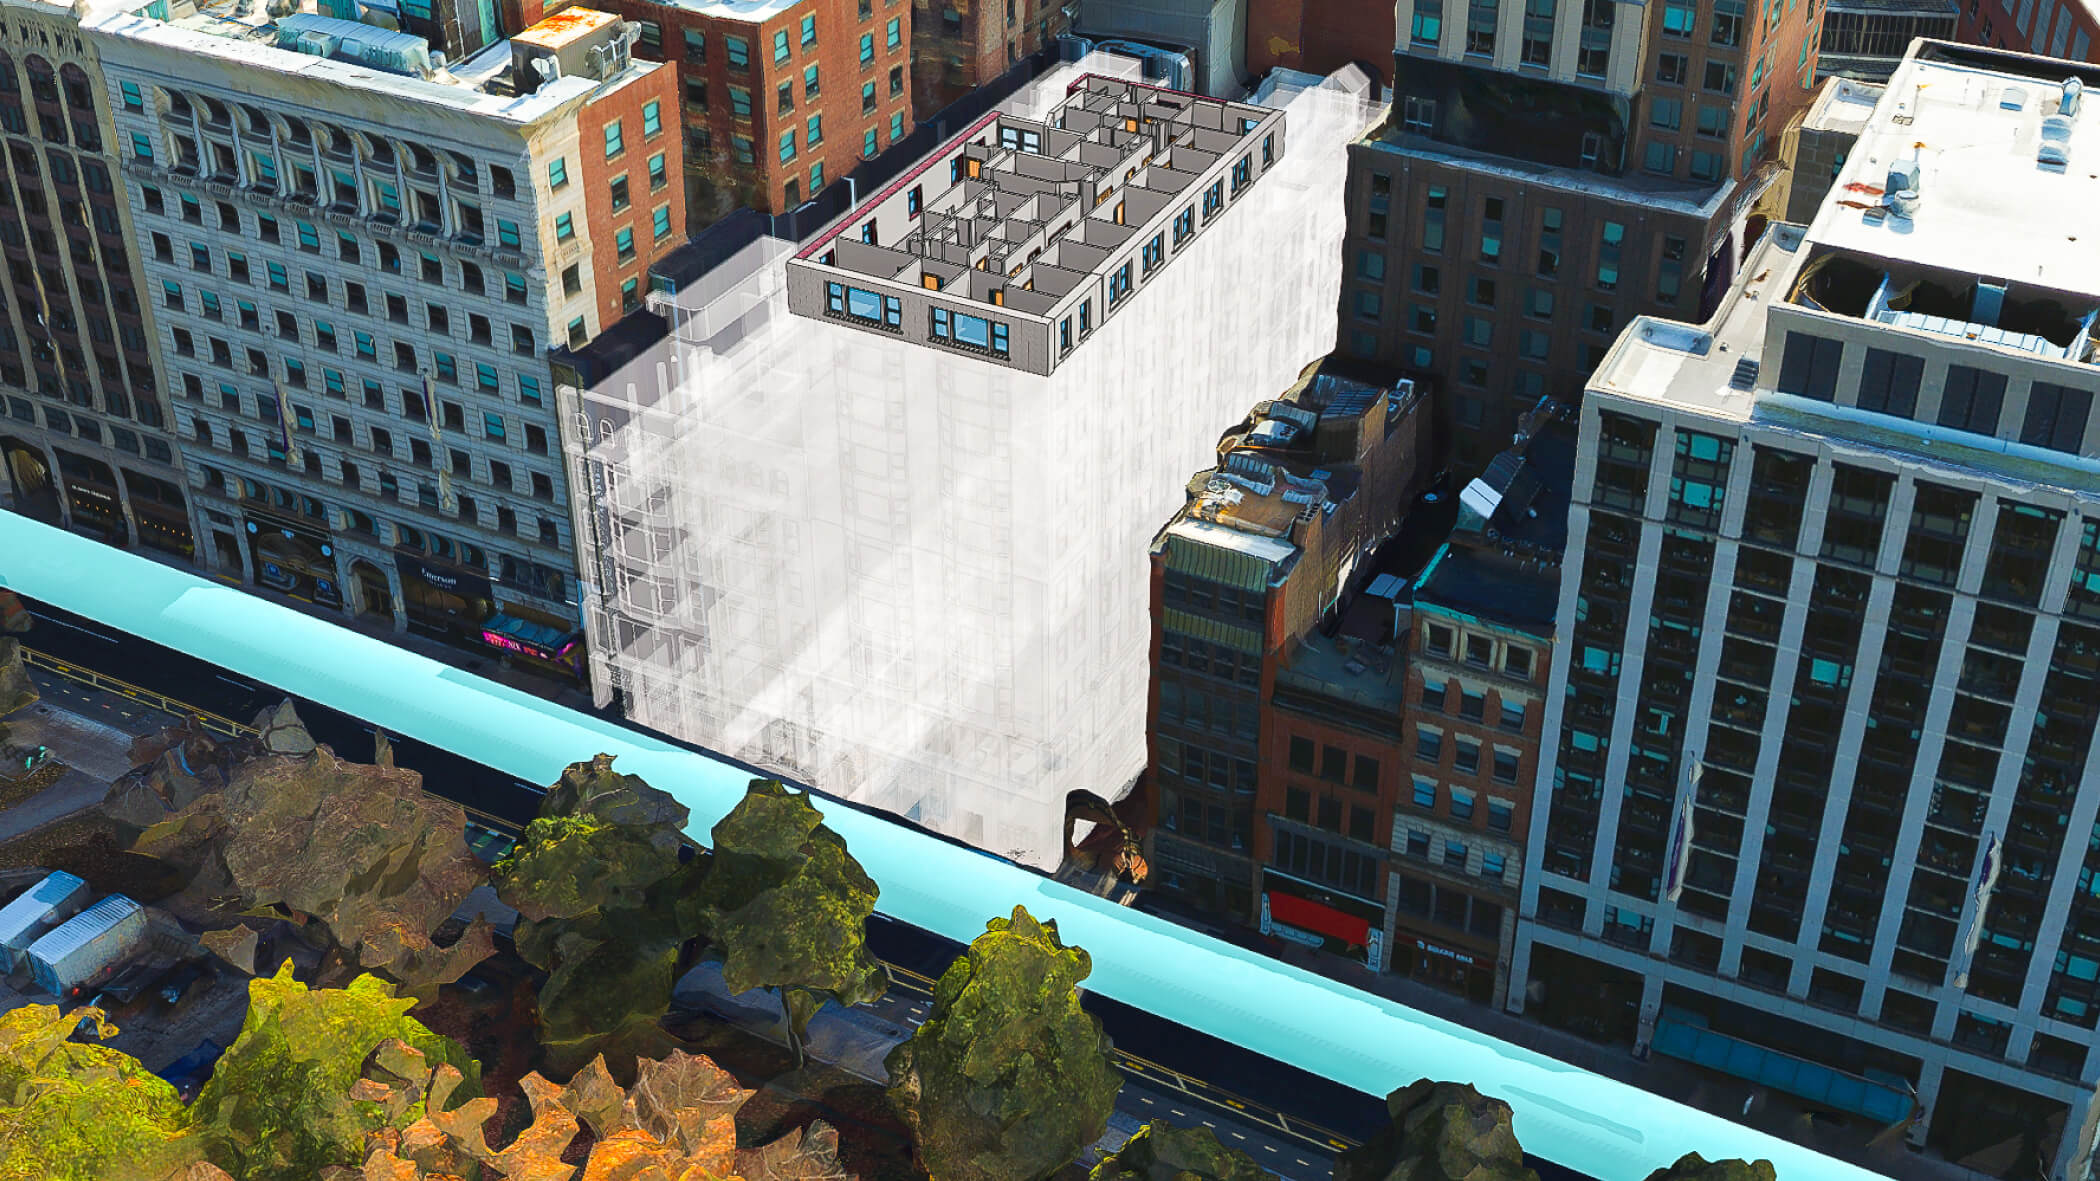 3D building model with many floors topped with a 3D room layout, set in a white frame against a blurred city background